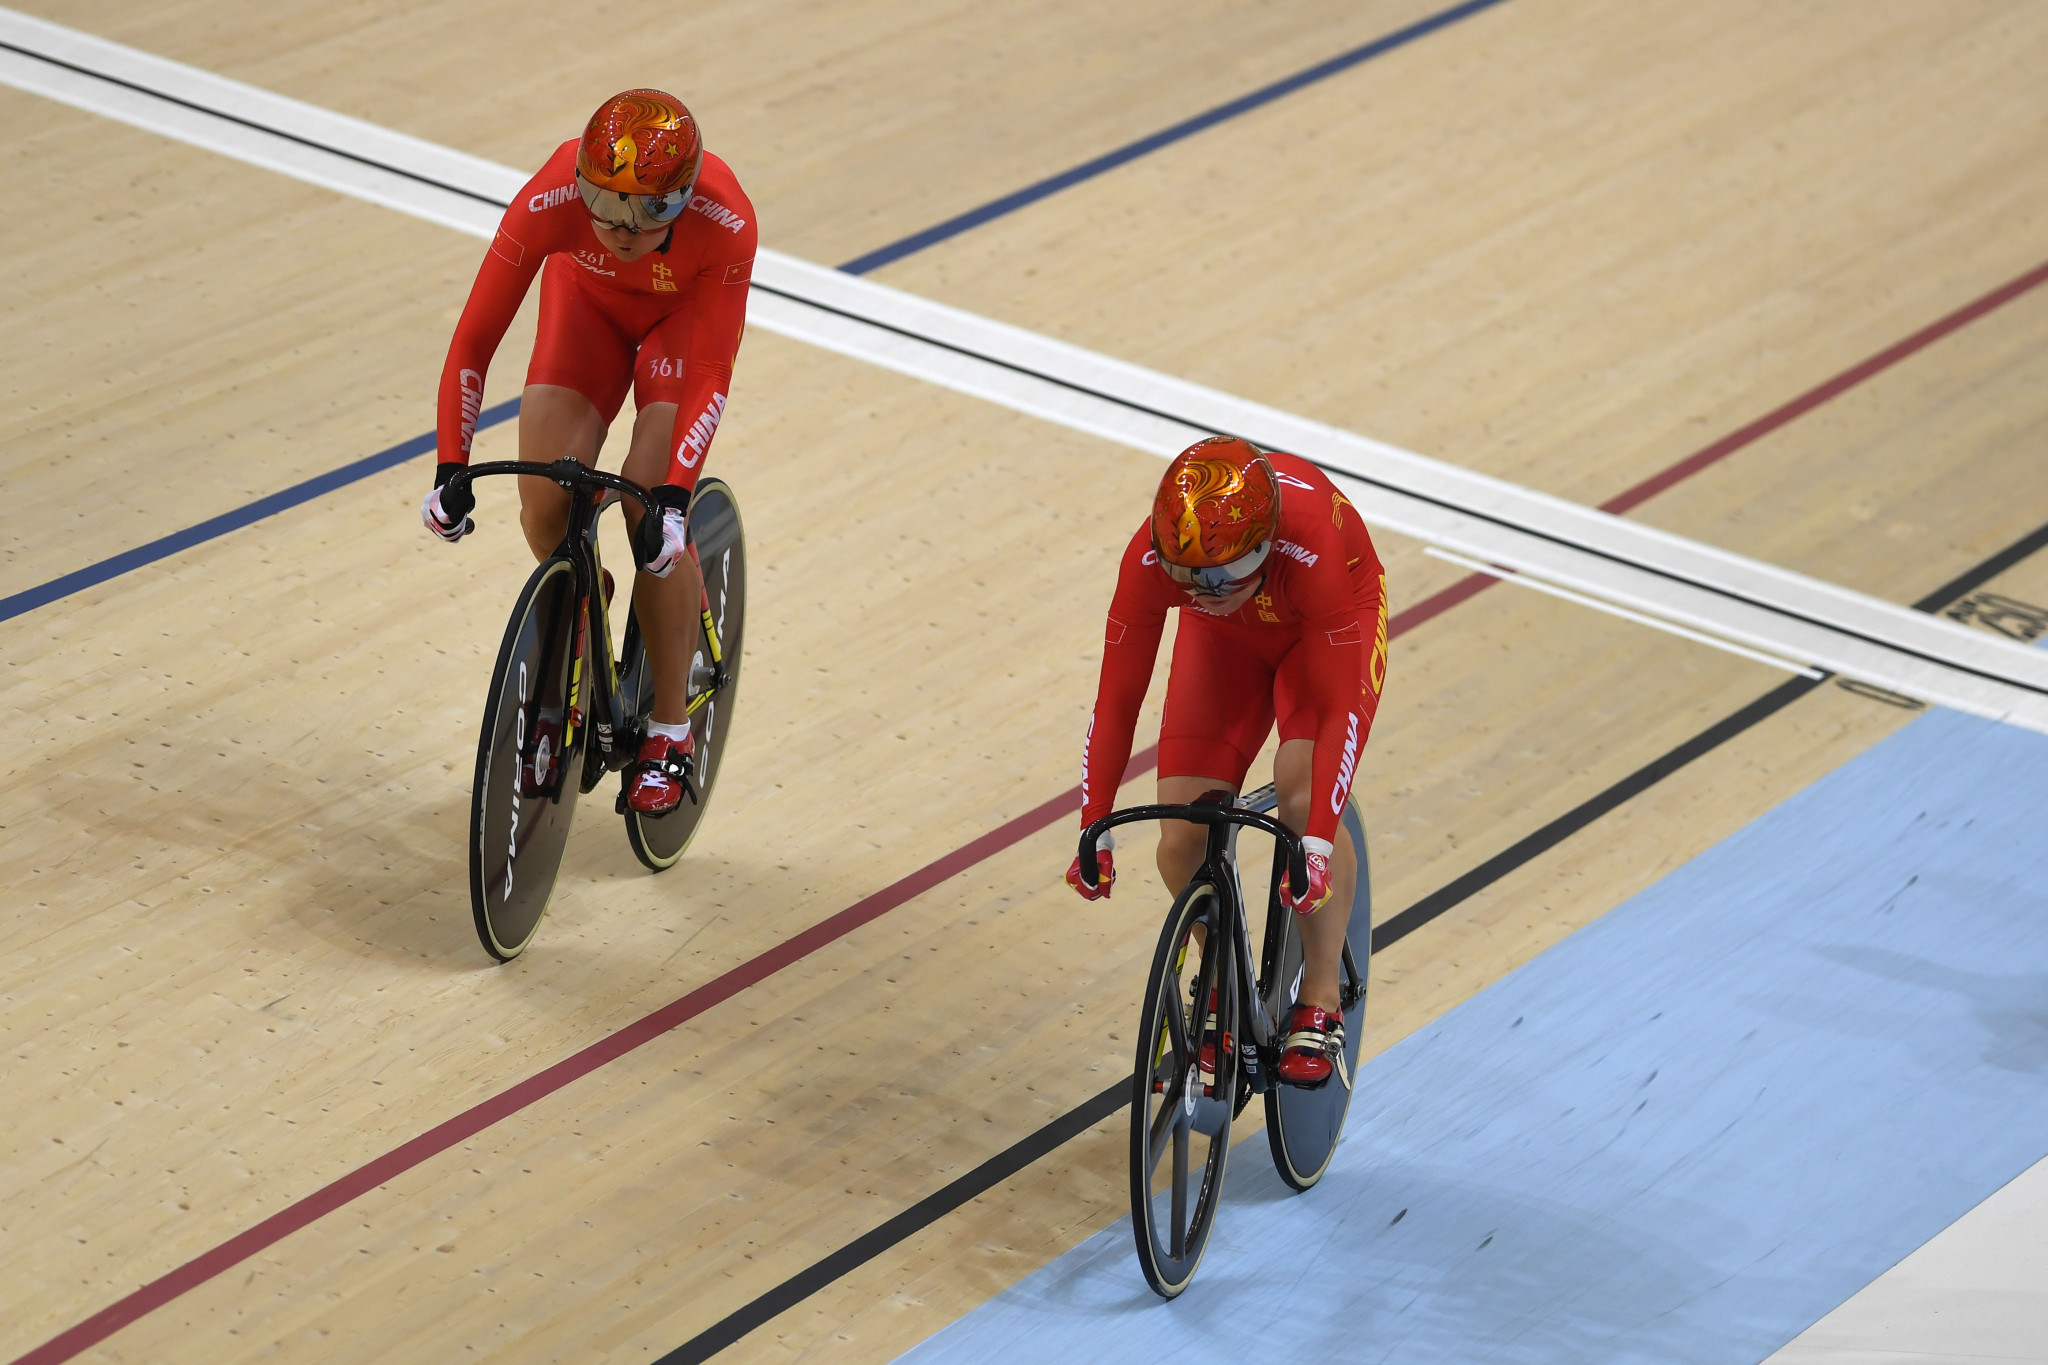 Lin Junhong and Zhong Tianshi won the women's team sprint event at the UCI Track Cycling World Cup in Hong Kong ©Getty Images